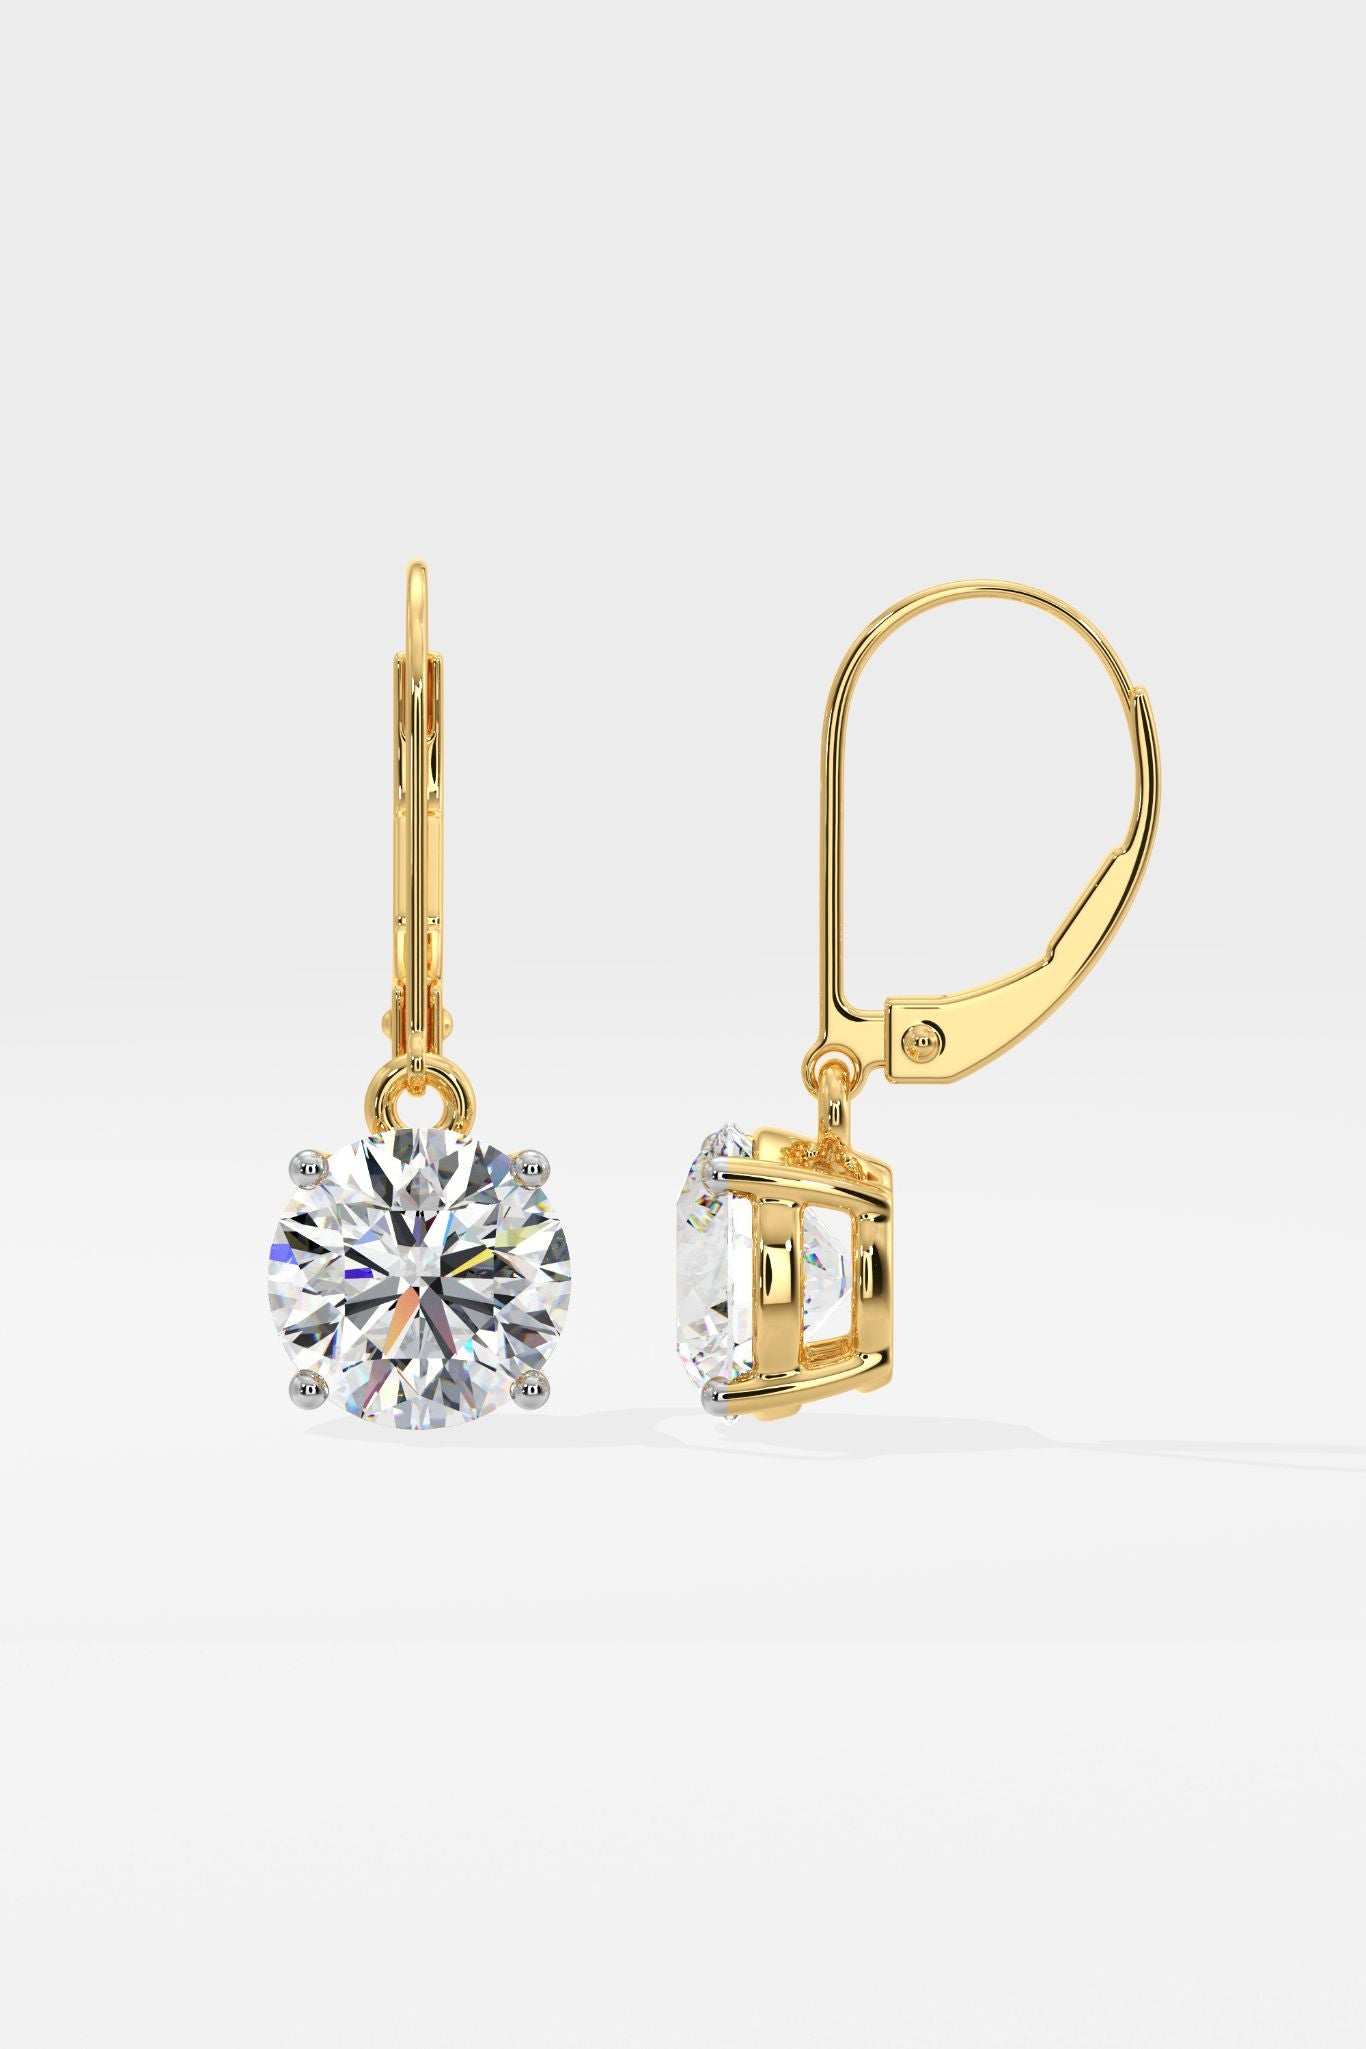 4 ct Solitaire Lever-Back Earrings - House Of Quadri